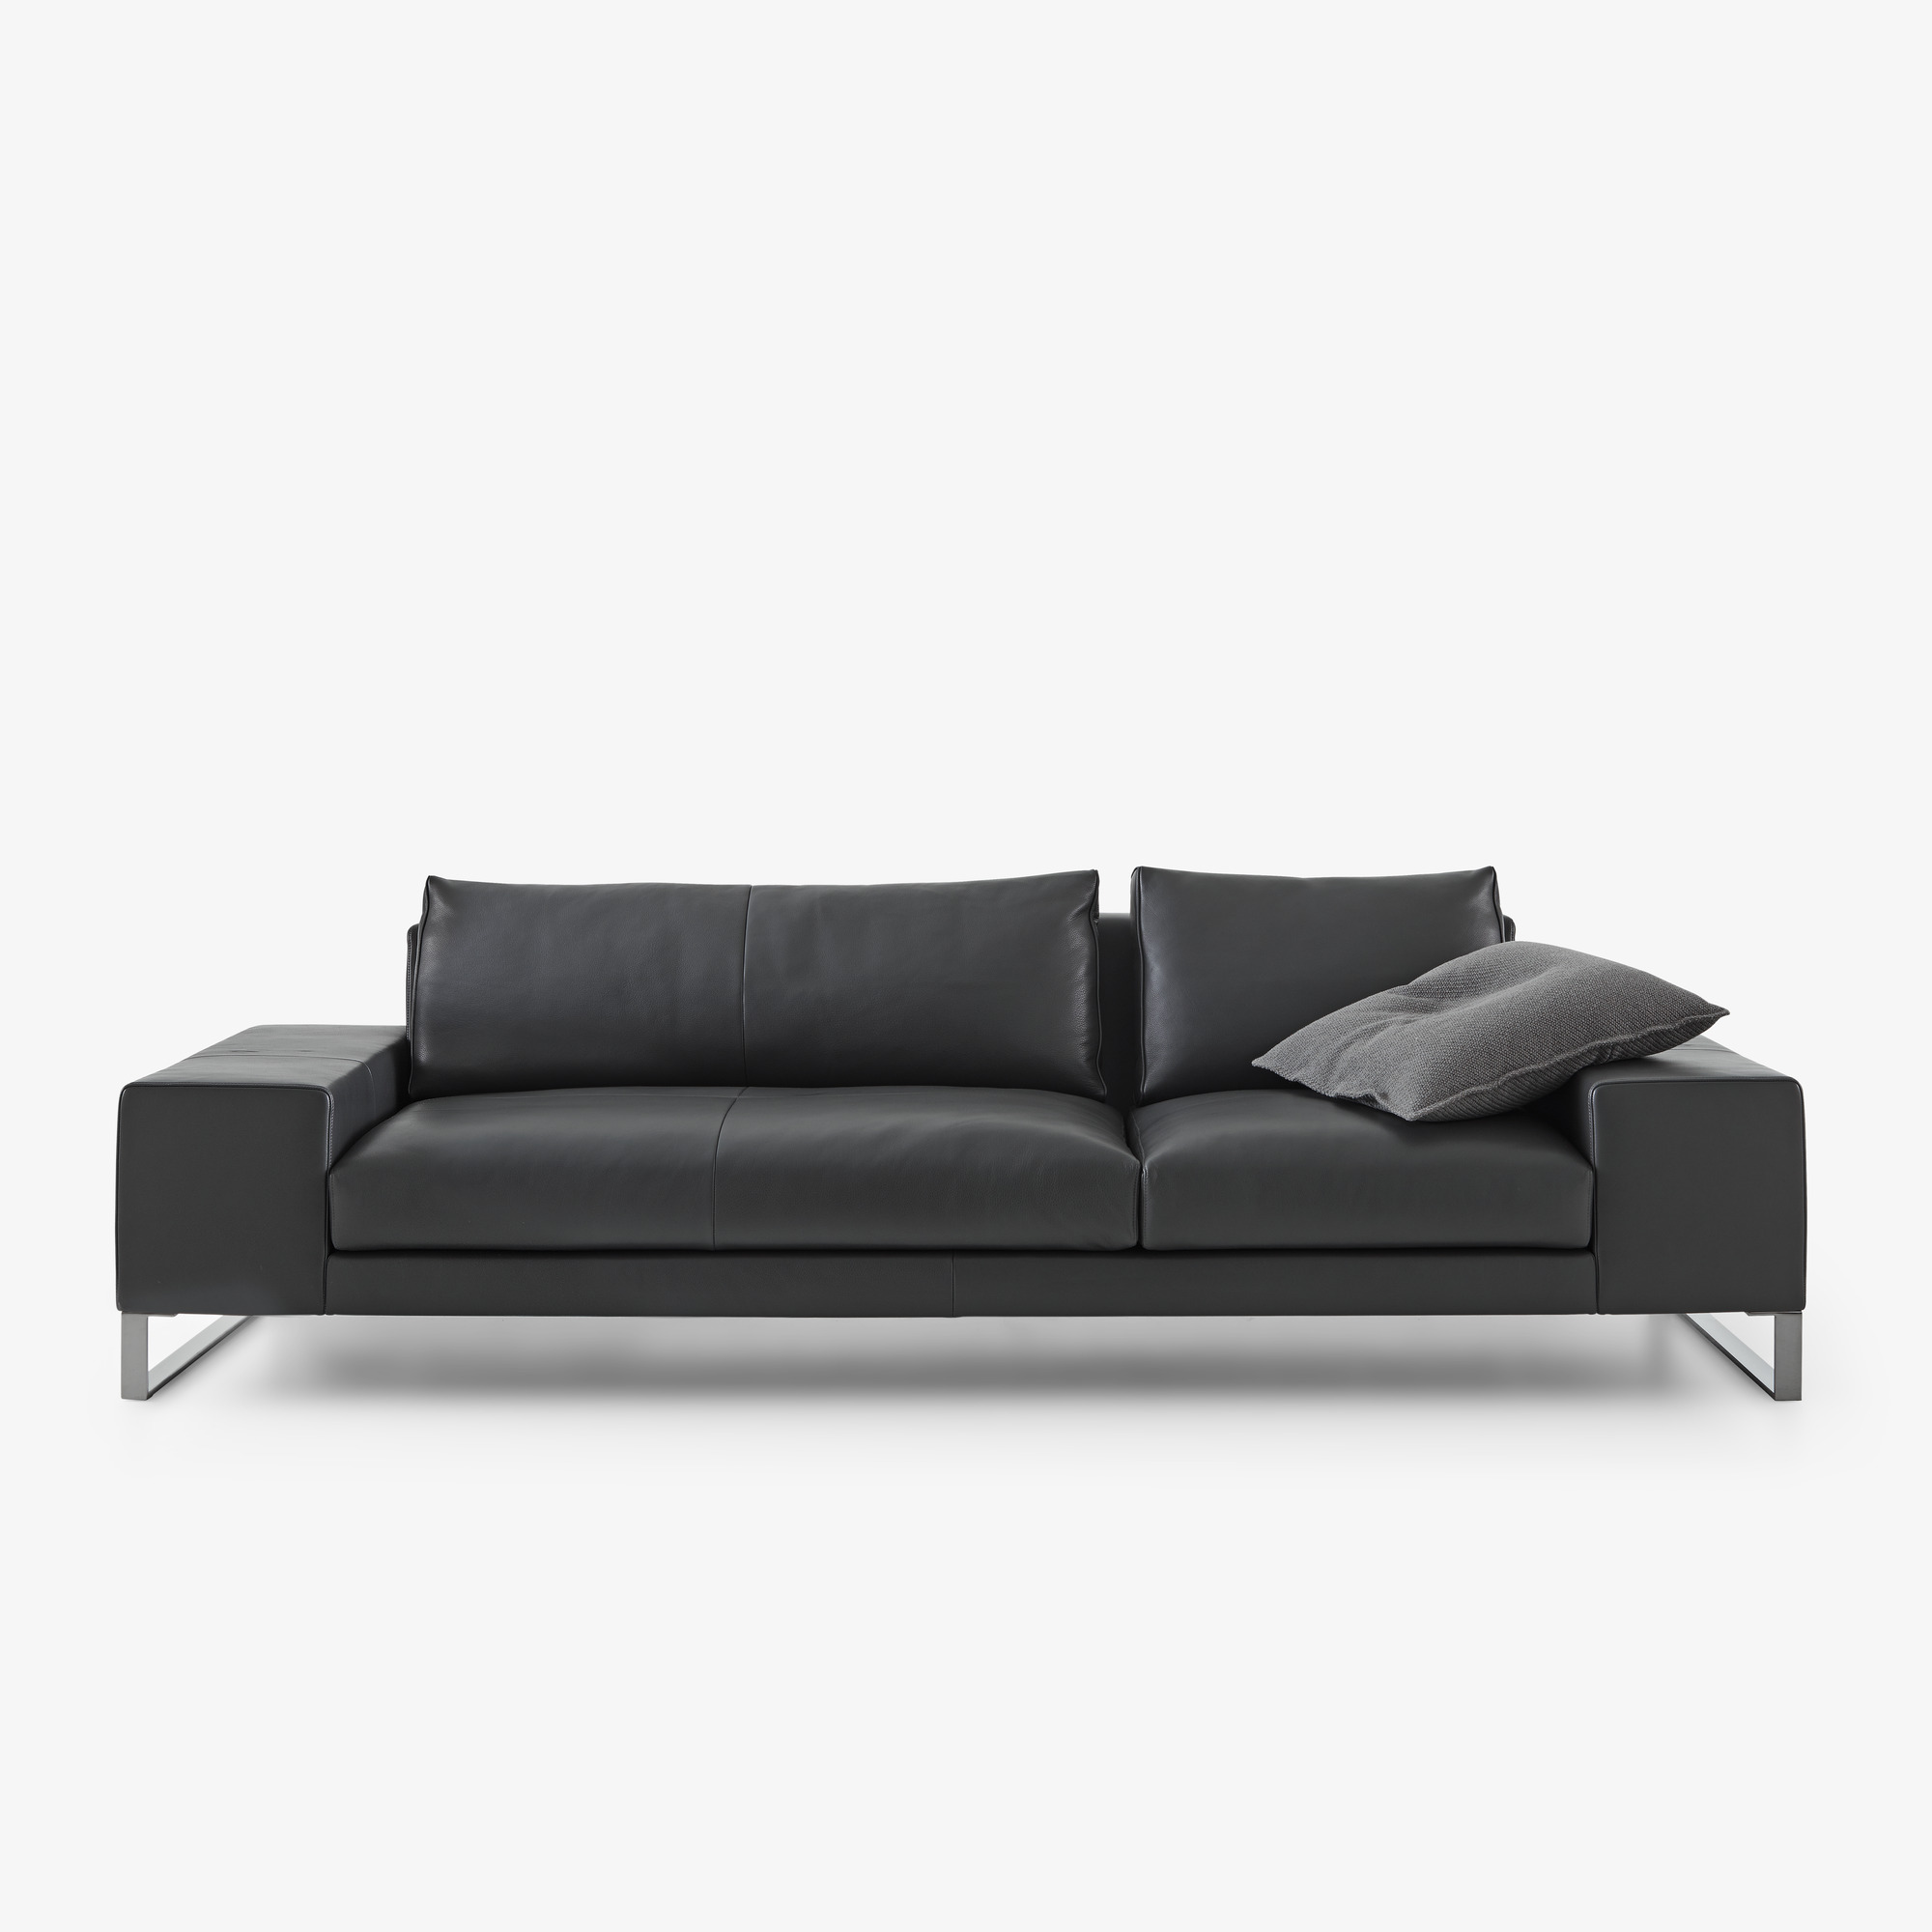 Image Sofa with armrest b complete element 1